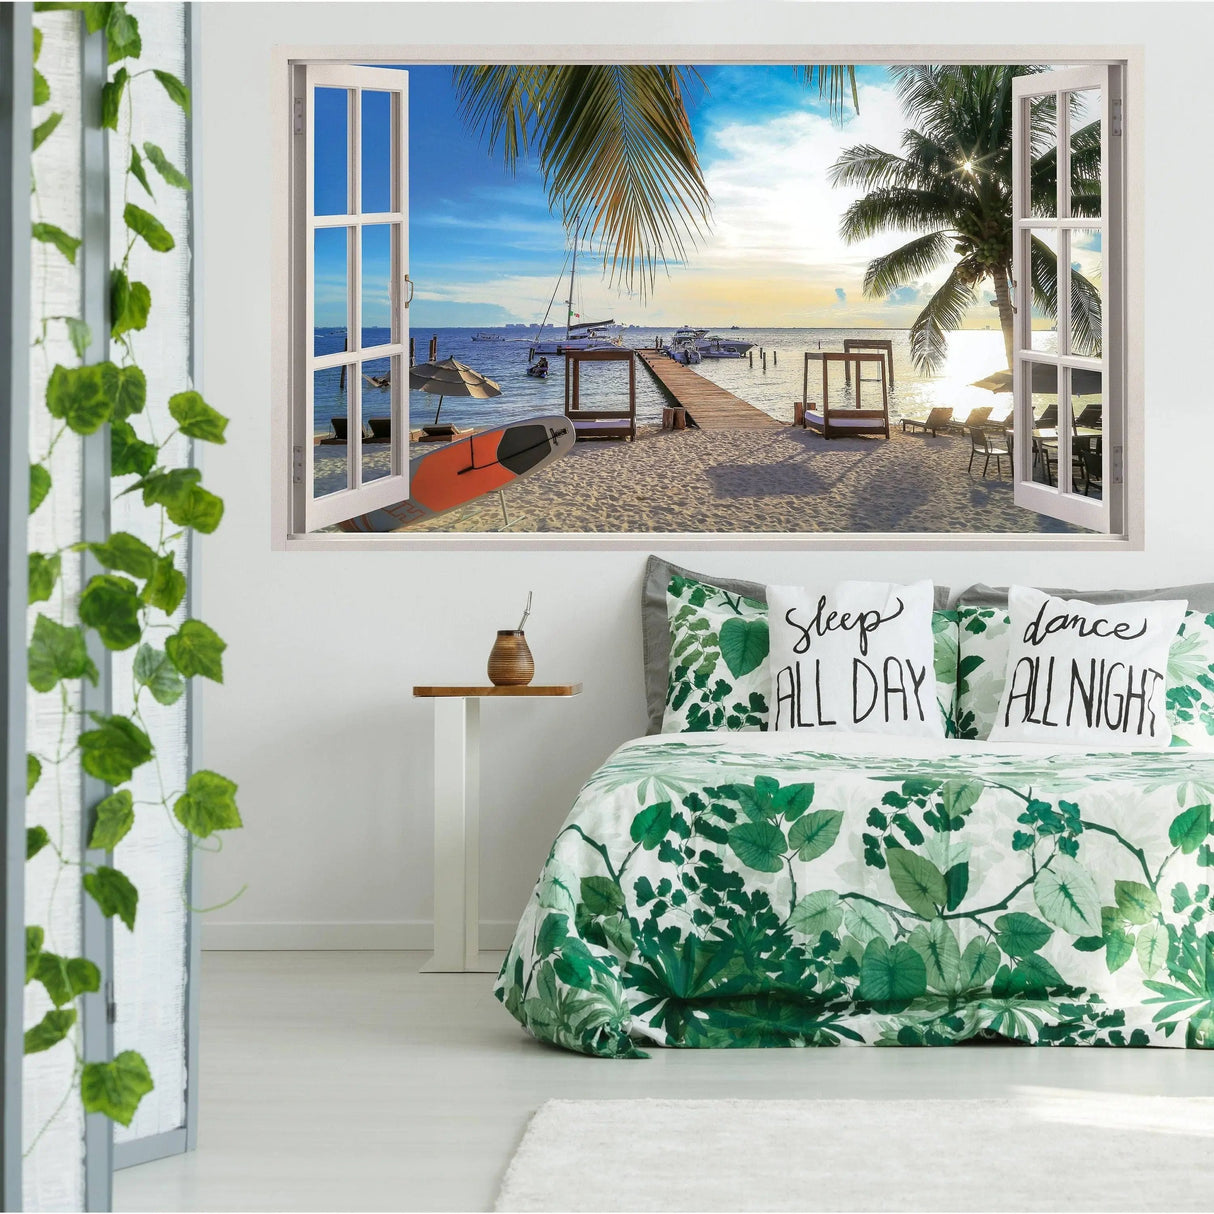 3d Window Beach View Wall Sticker - Removable Bedroom Ocean Scene Vinyl Room Decal - Large Tropical Picture Frame Landscape Decoration - Decords